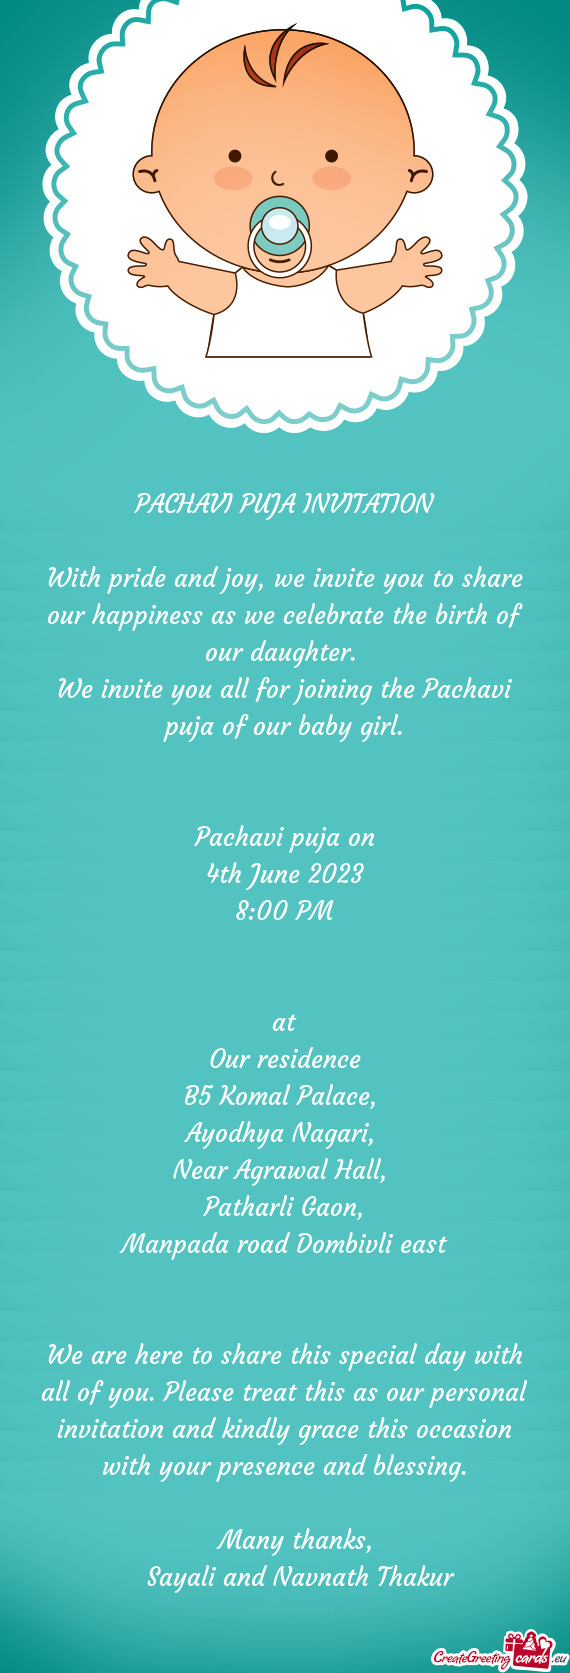 We invite you all for joining the Pachavi puja of our baby girl